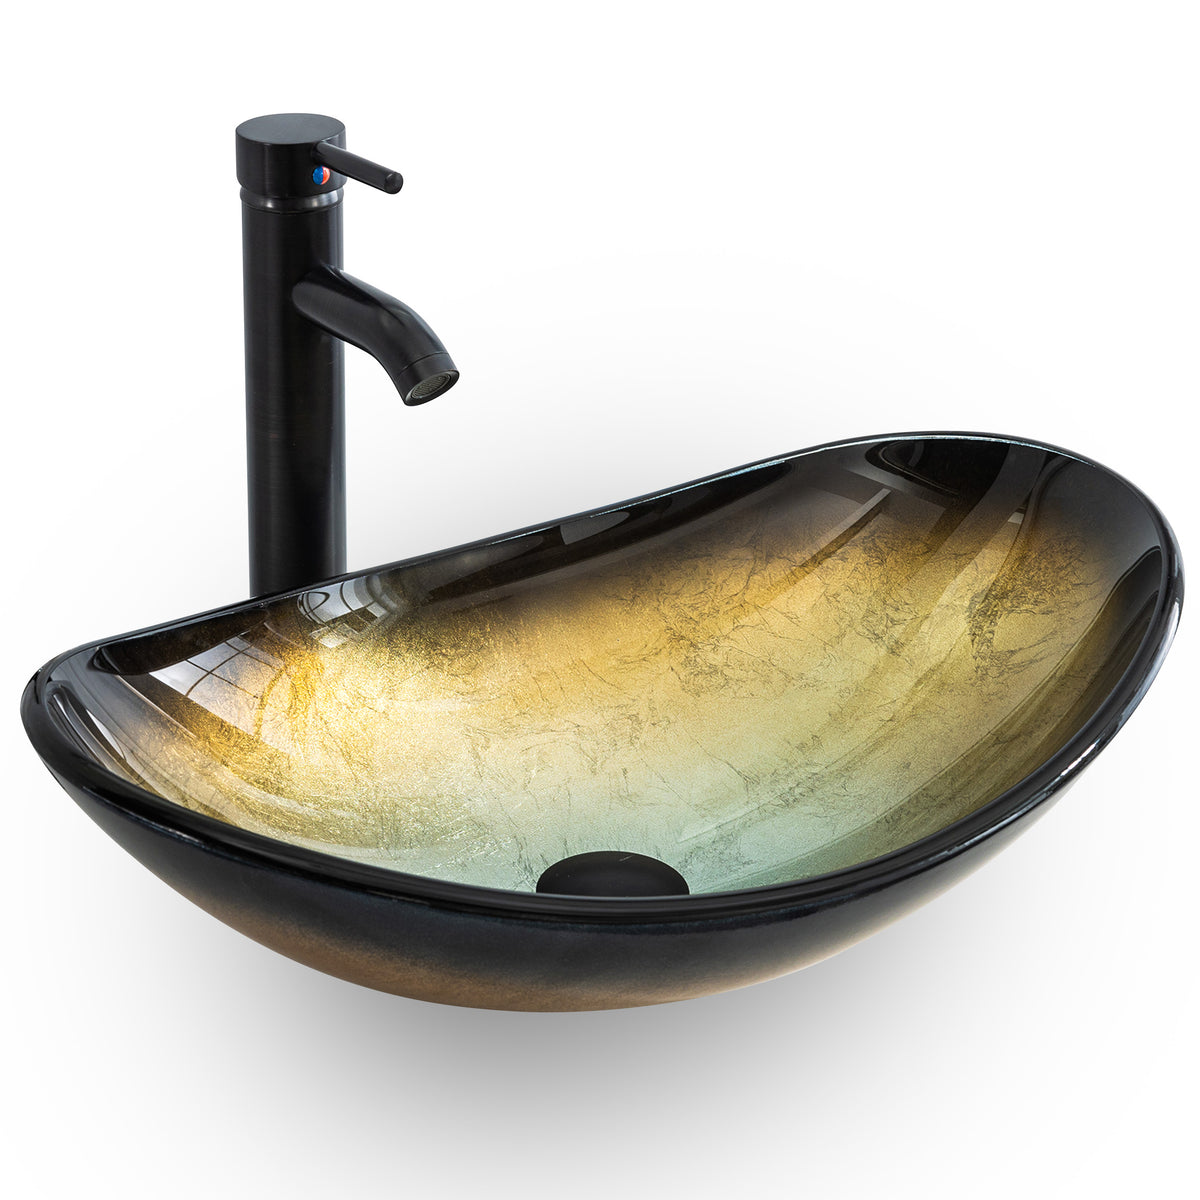 Bathroom Vessel Sink Combo Tempered Glass Bowl & Faucet & Pop Up Drain—Champagne Boat